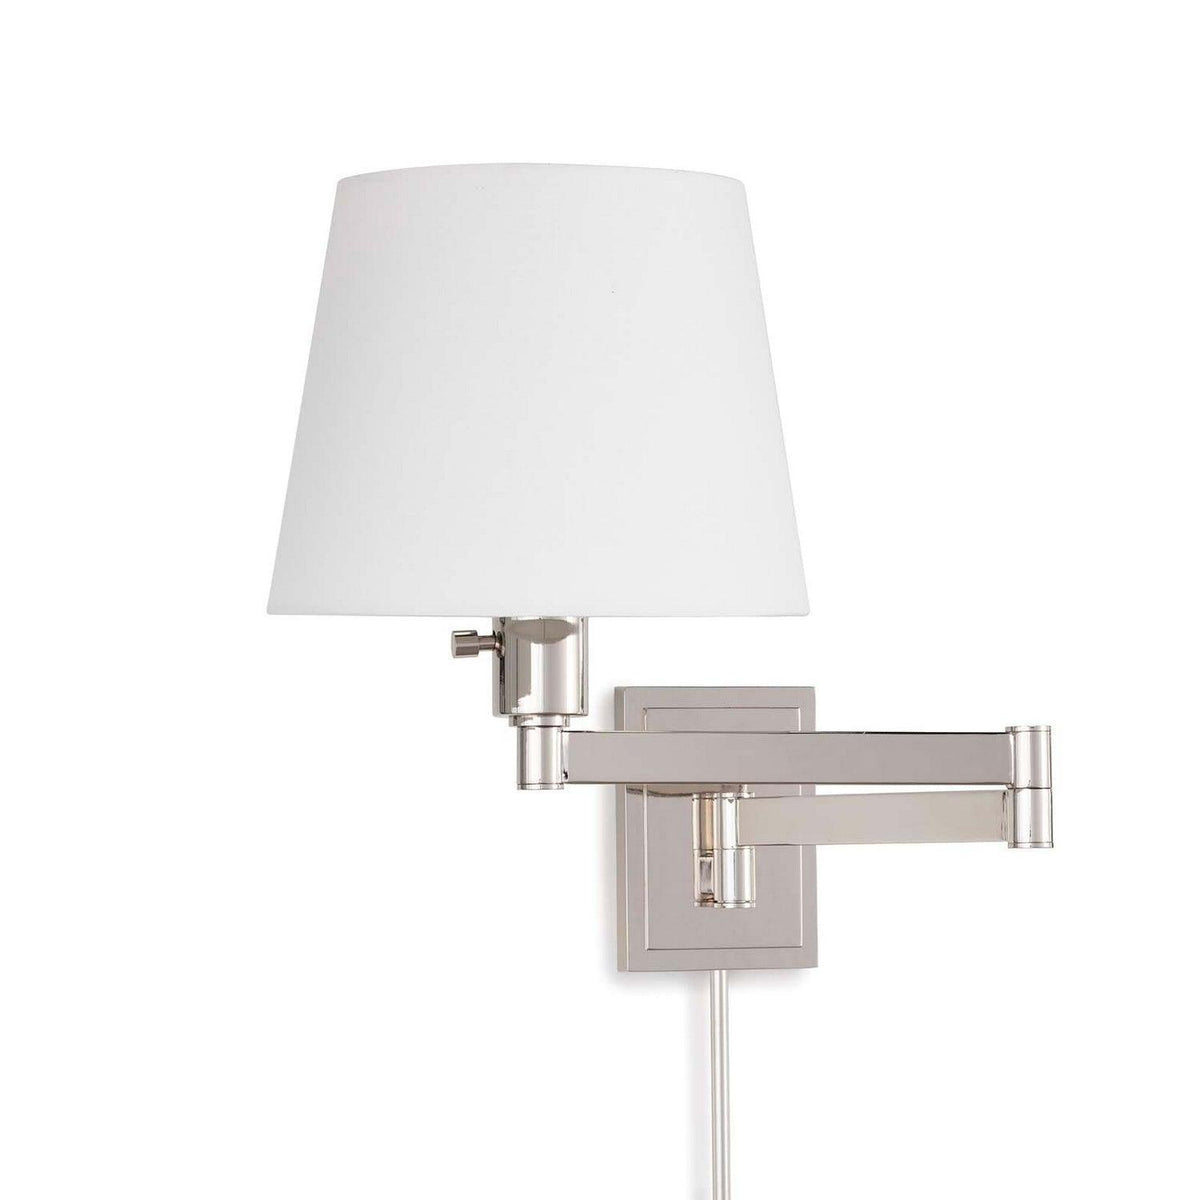 Regina Andrew - Southern Living Virtue Wall Sconce - 15-1161PN | Montreal Lighting & Hardware